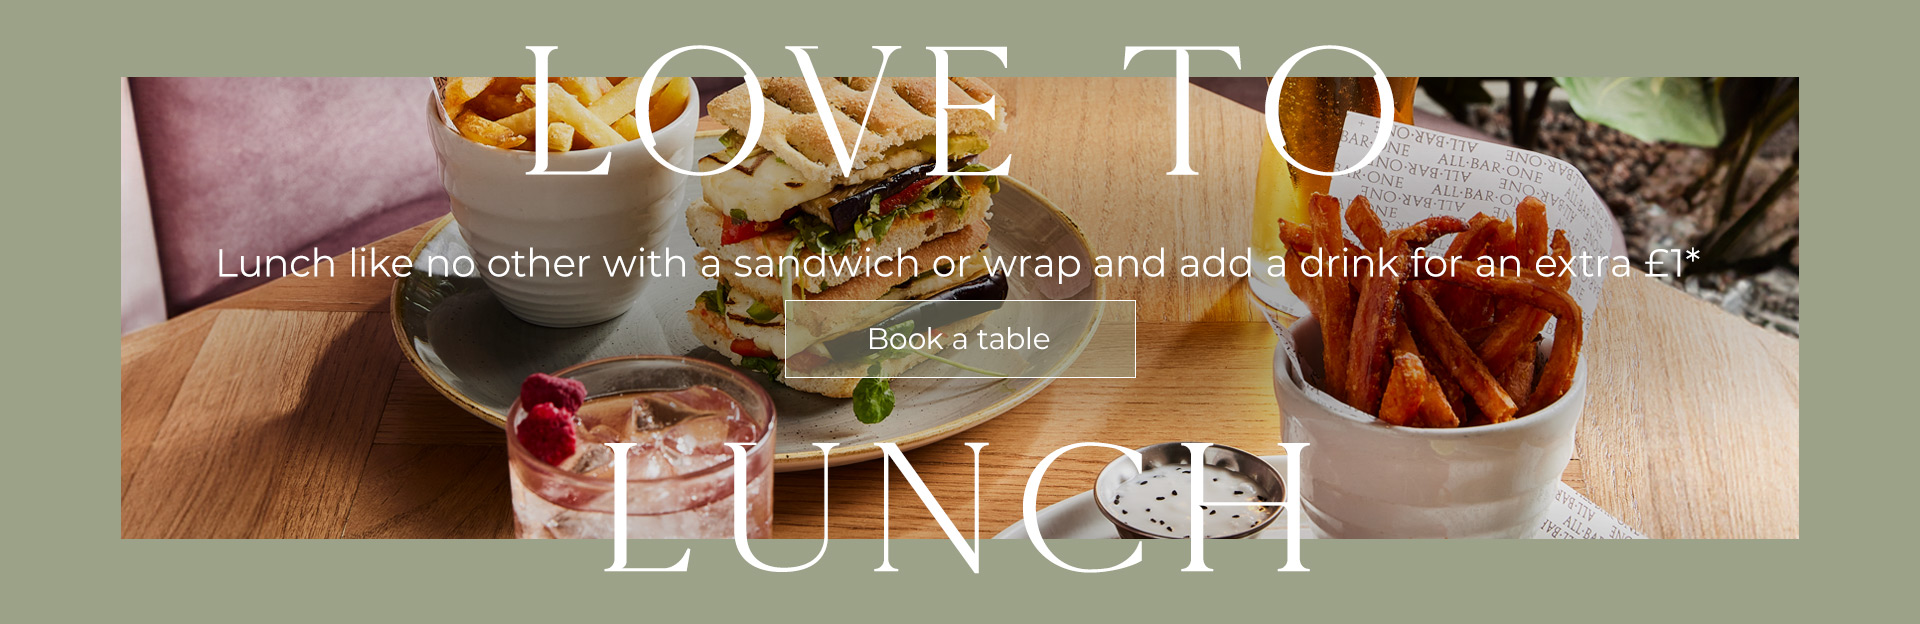 Lunch Offer at All Bar One Leicester Square